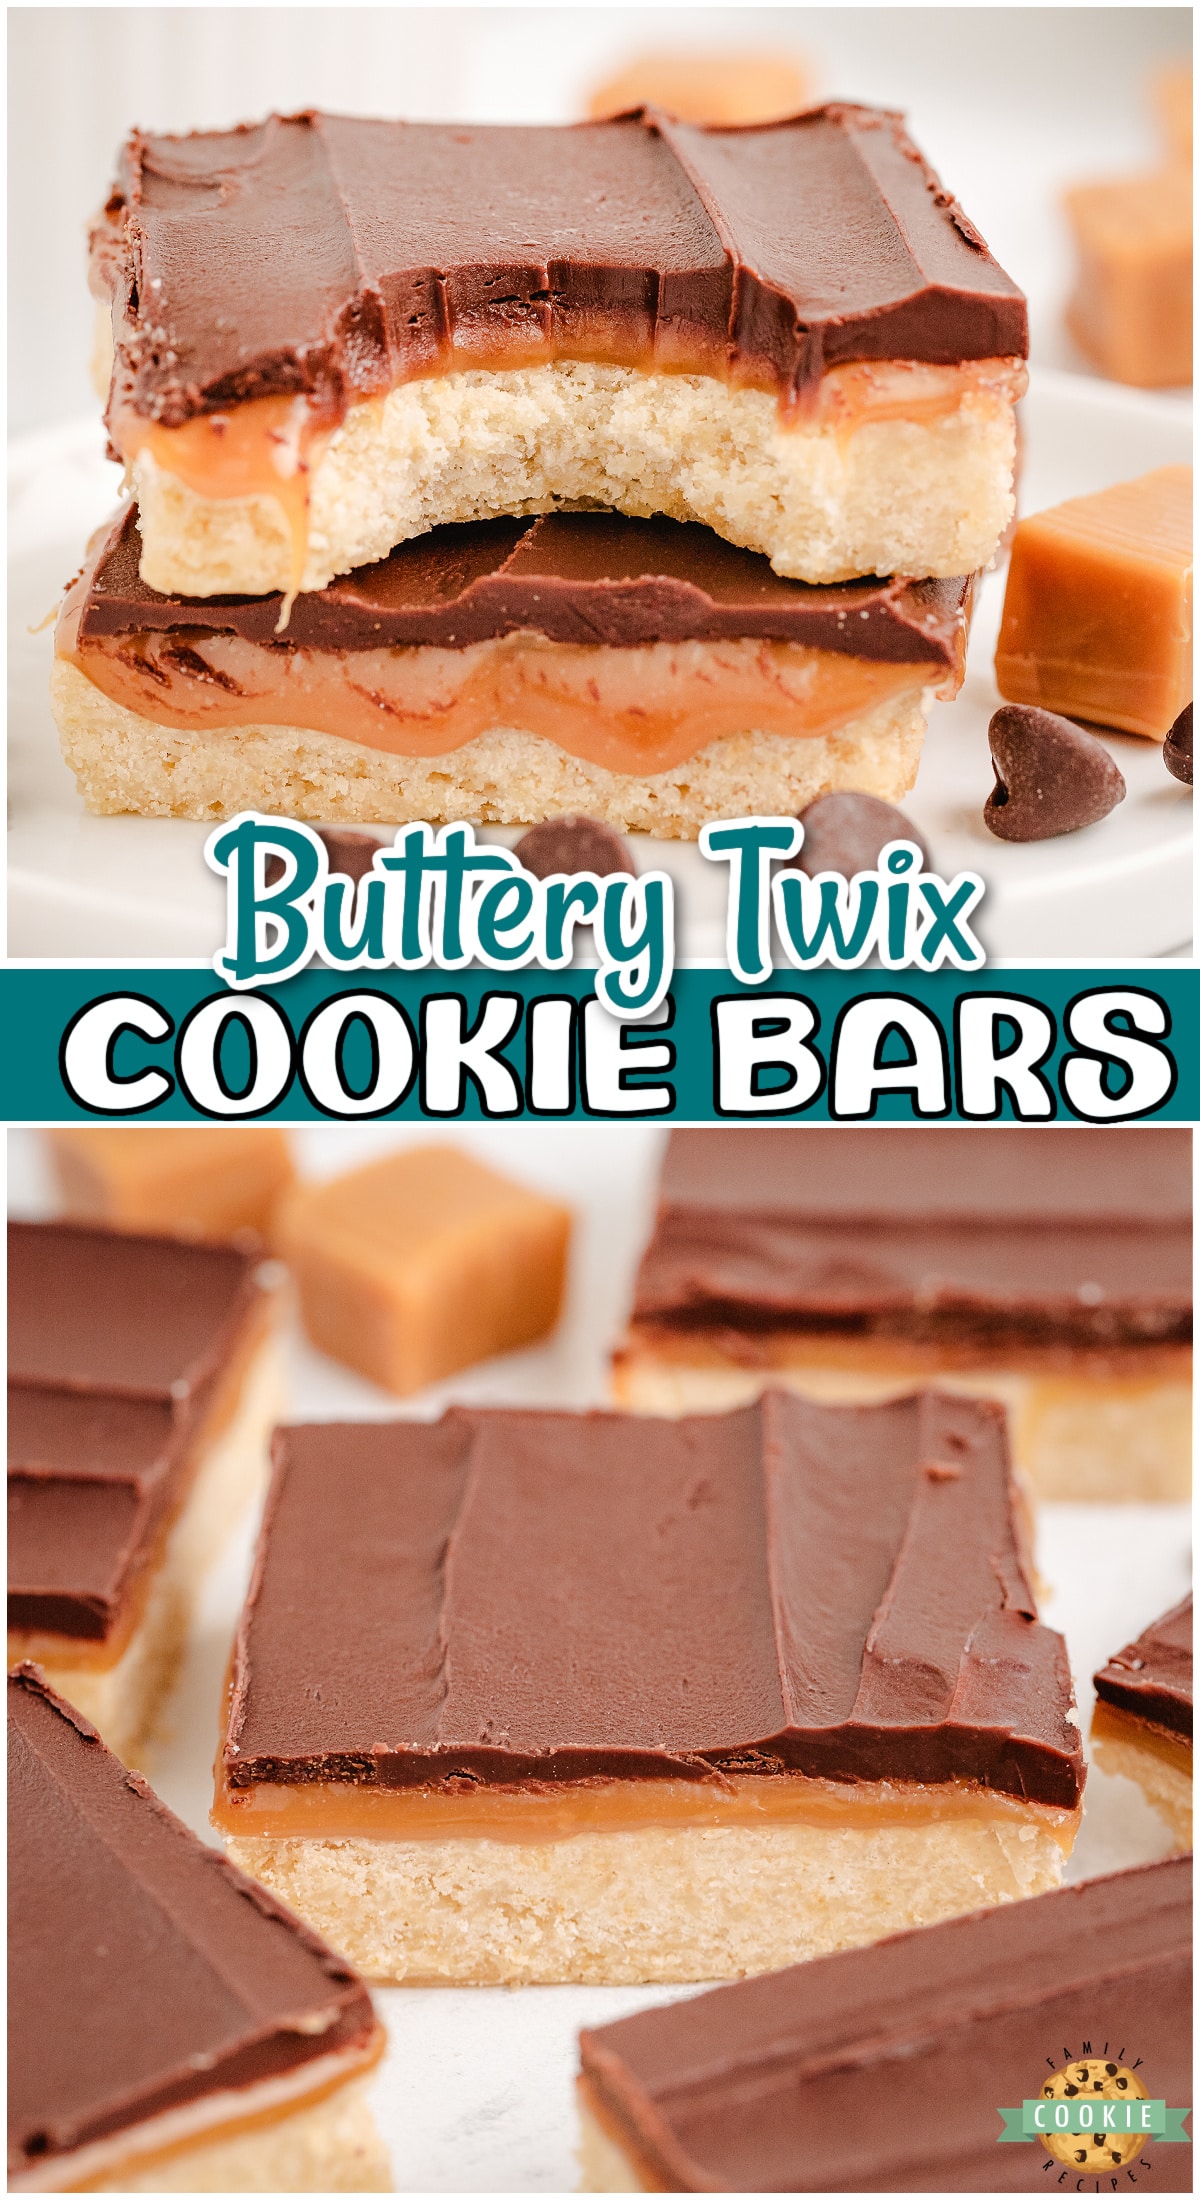 Twix Cookie Bars are shortbread cookie bars topped with a layer of caramel and chocolate! Homemade caramel shortbread dessert bars are made easy and serve a crowd!